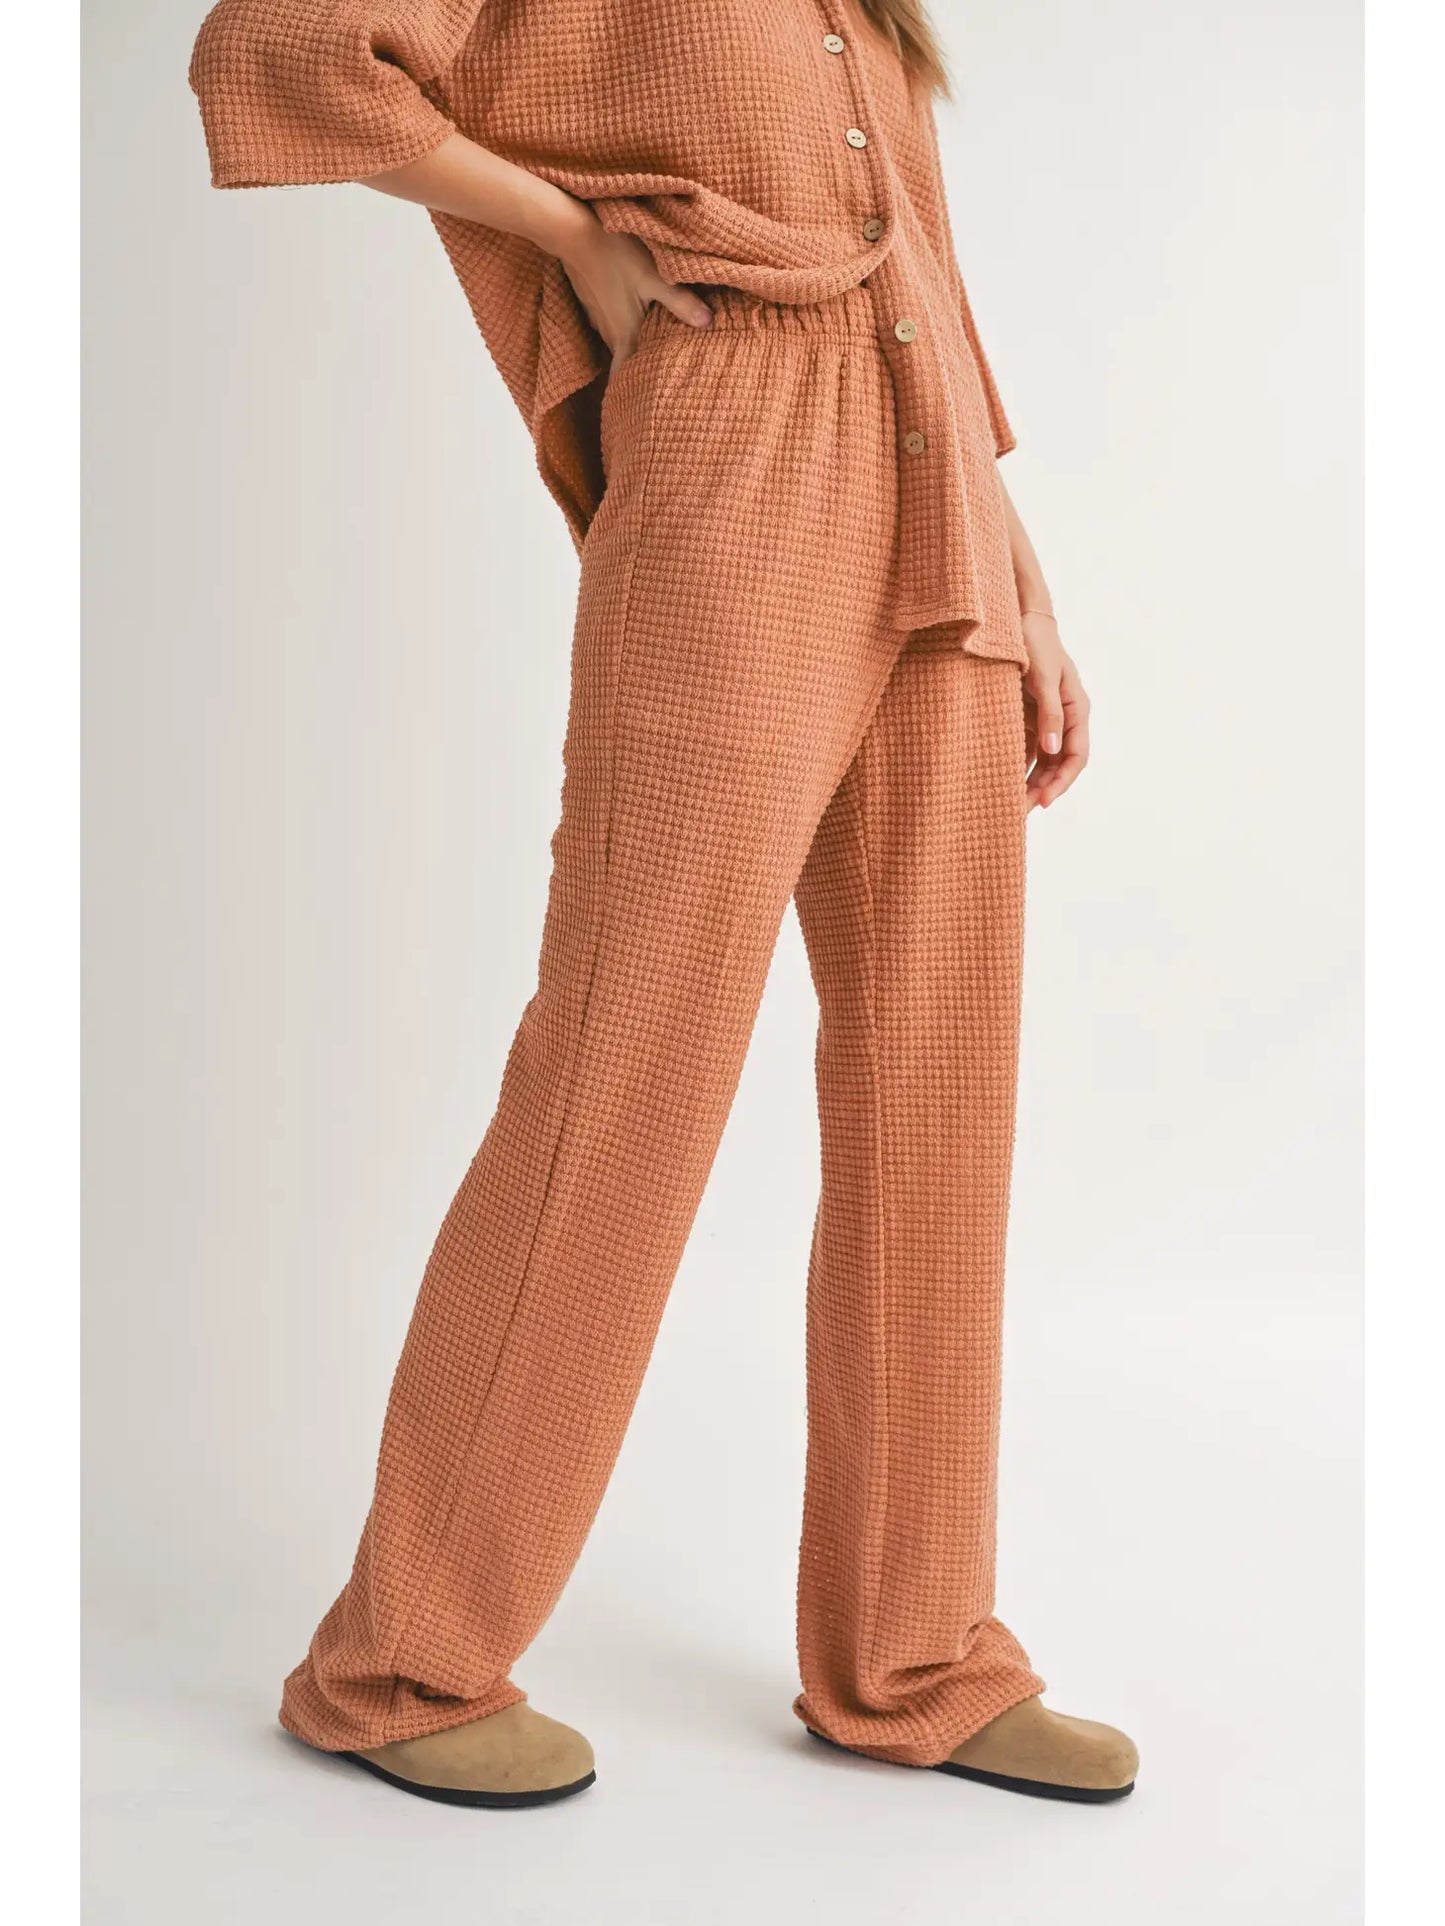 Clay Waffled Fabric Knitted Pants